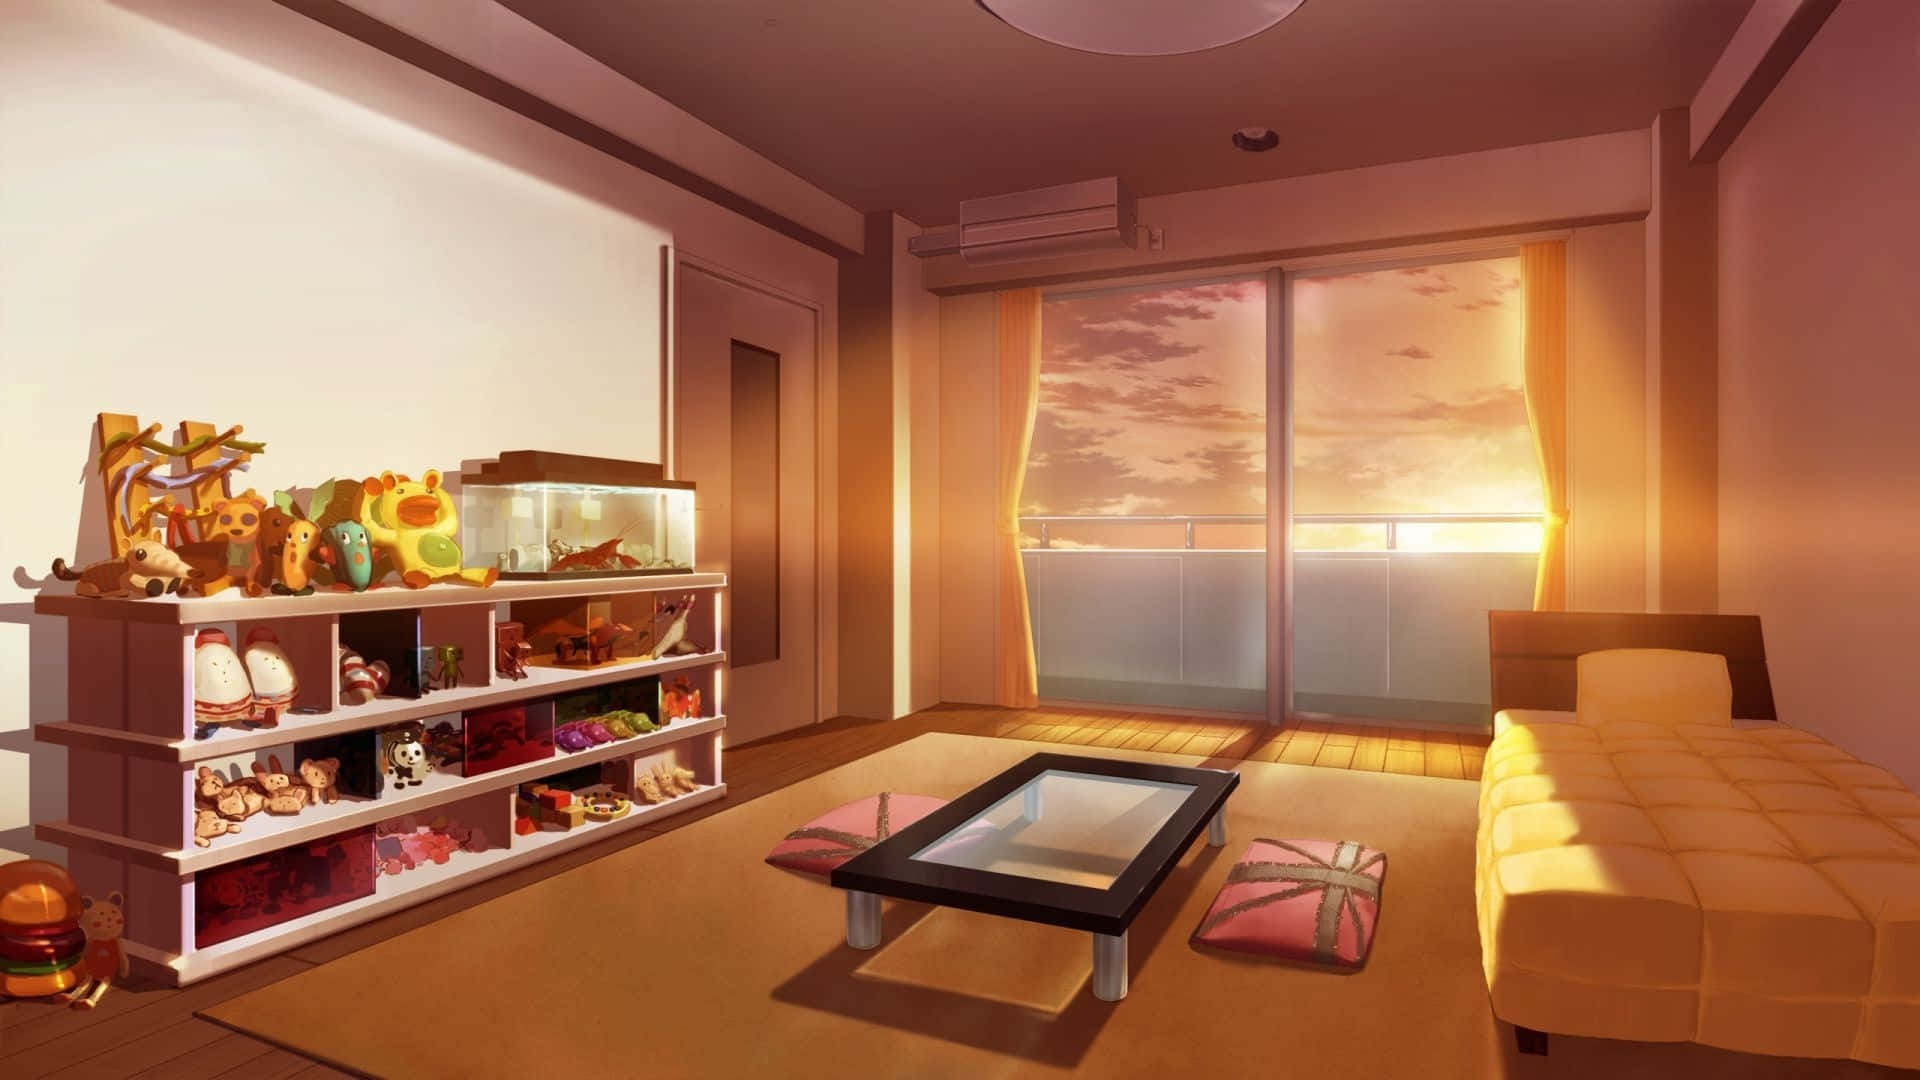 Invite yourself into this cozy Anime Bedroom and brim with excitement!